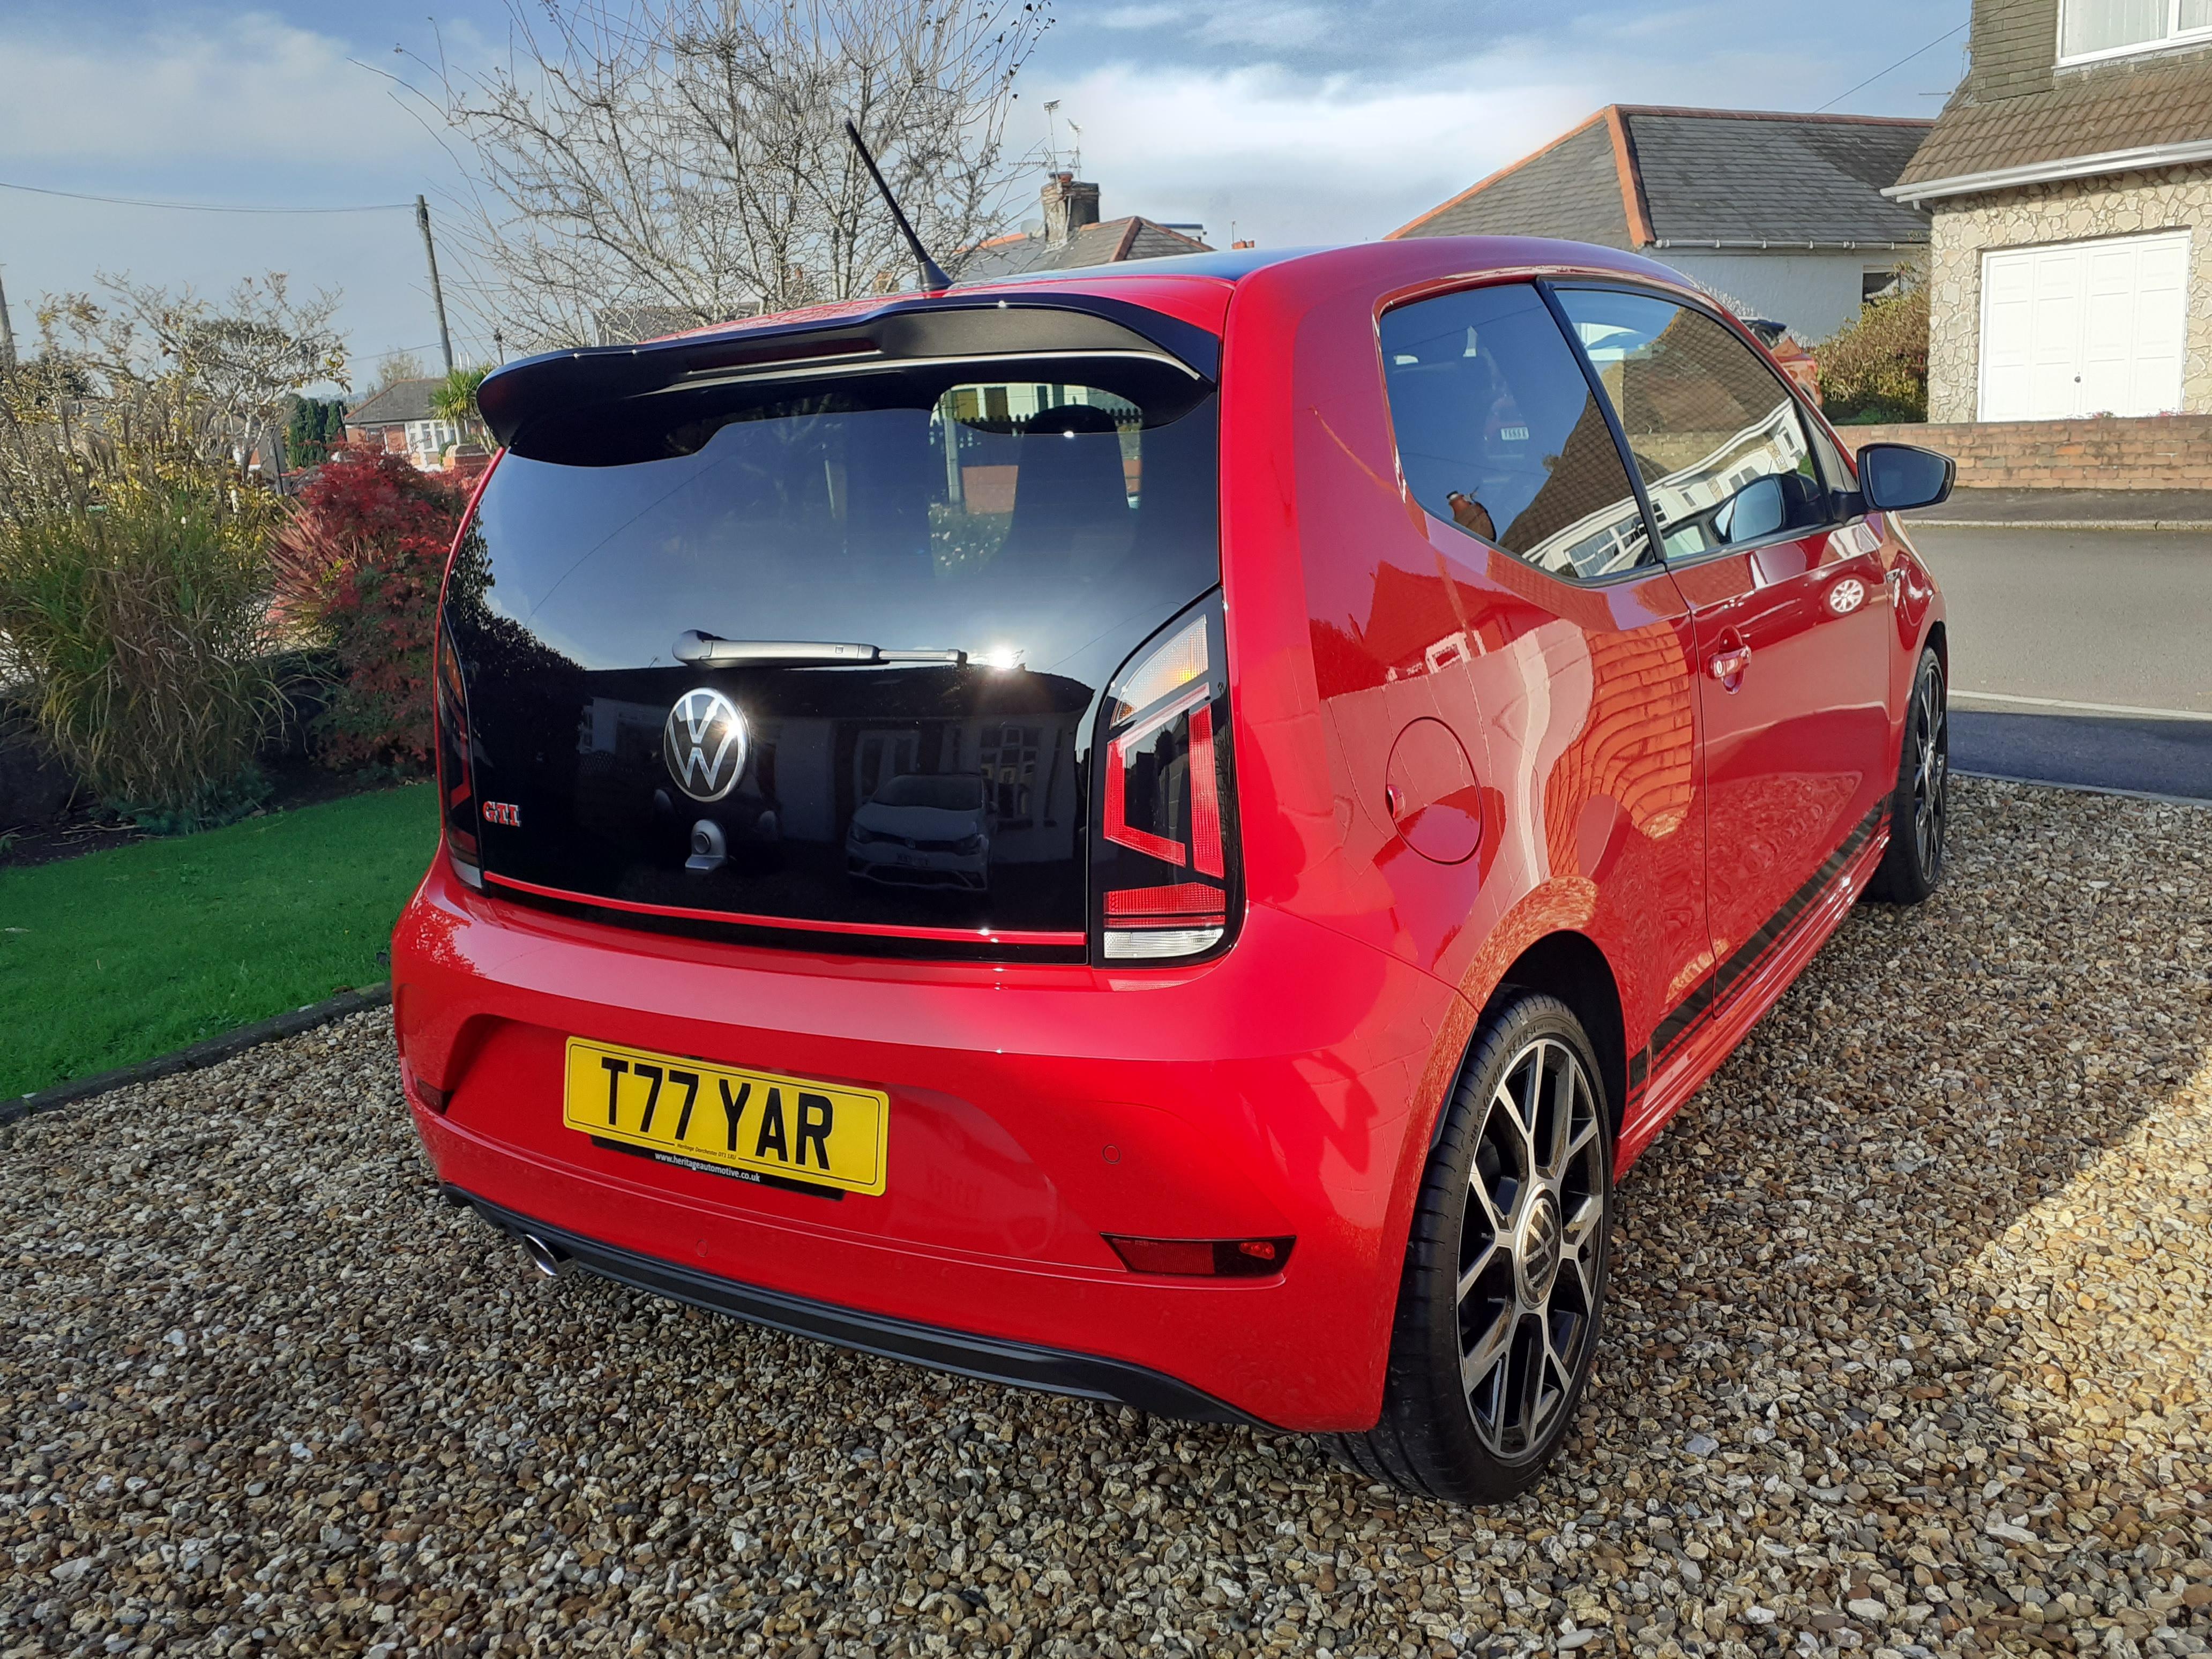 VW Lupo GTI - Why I'd Have One Over an Up! GTI Any Day of The Week